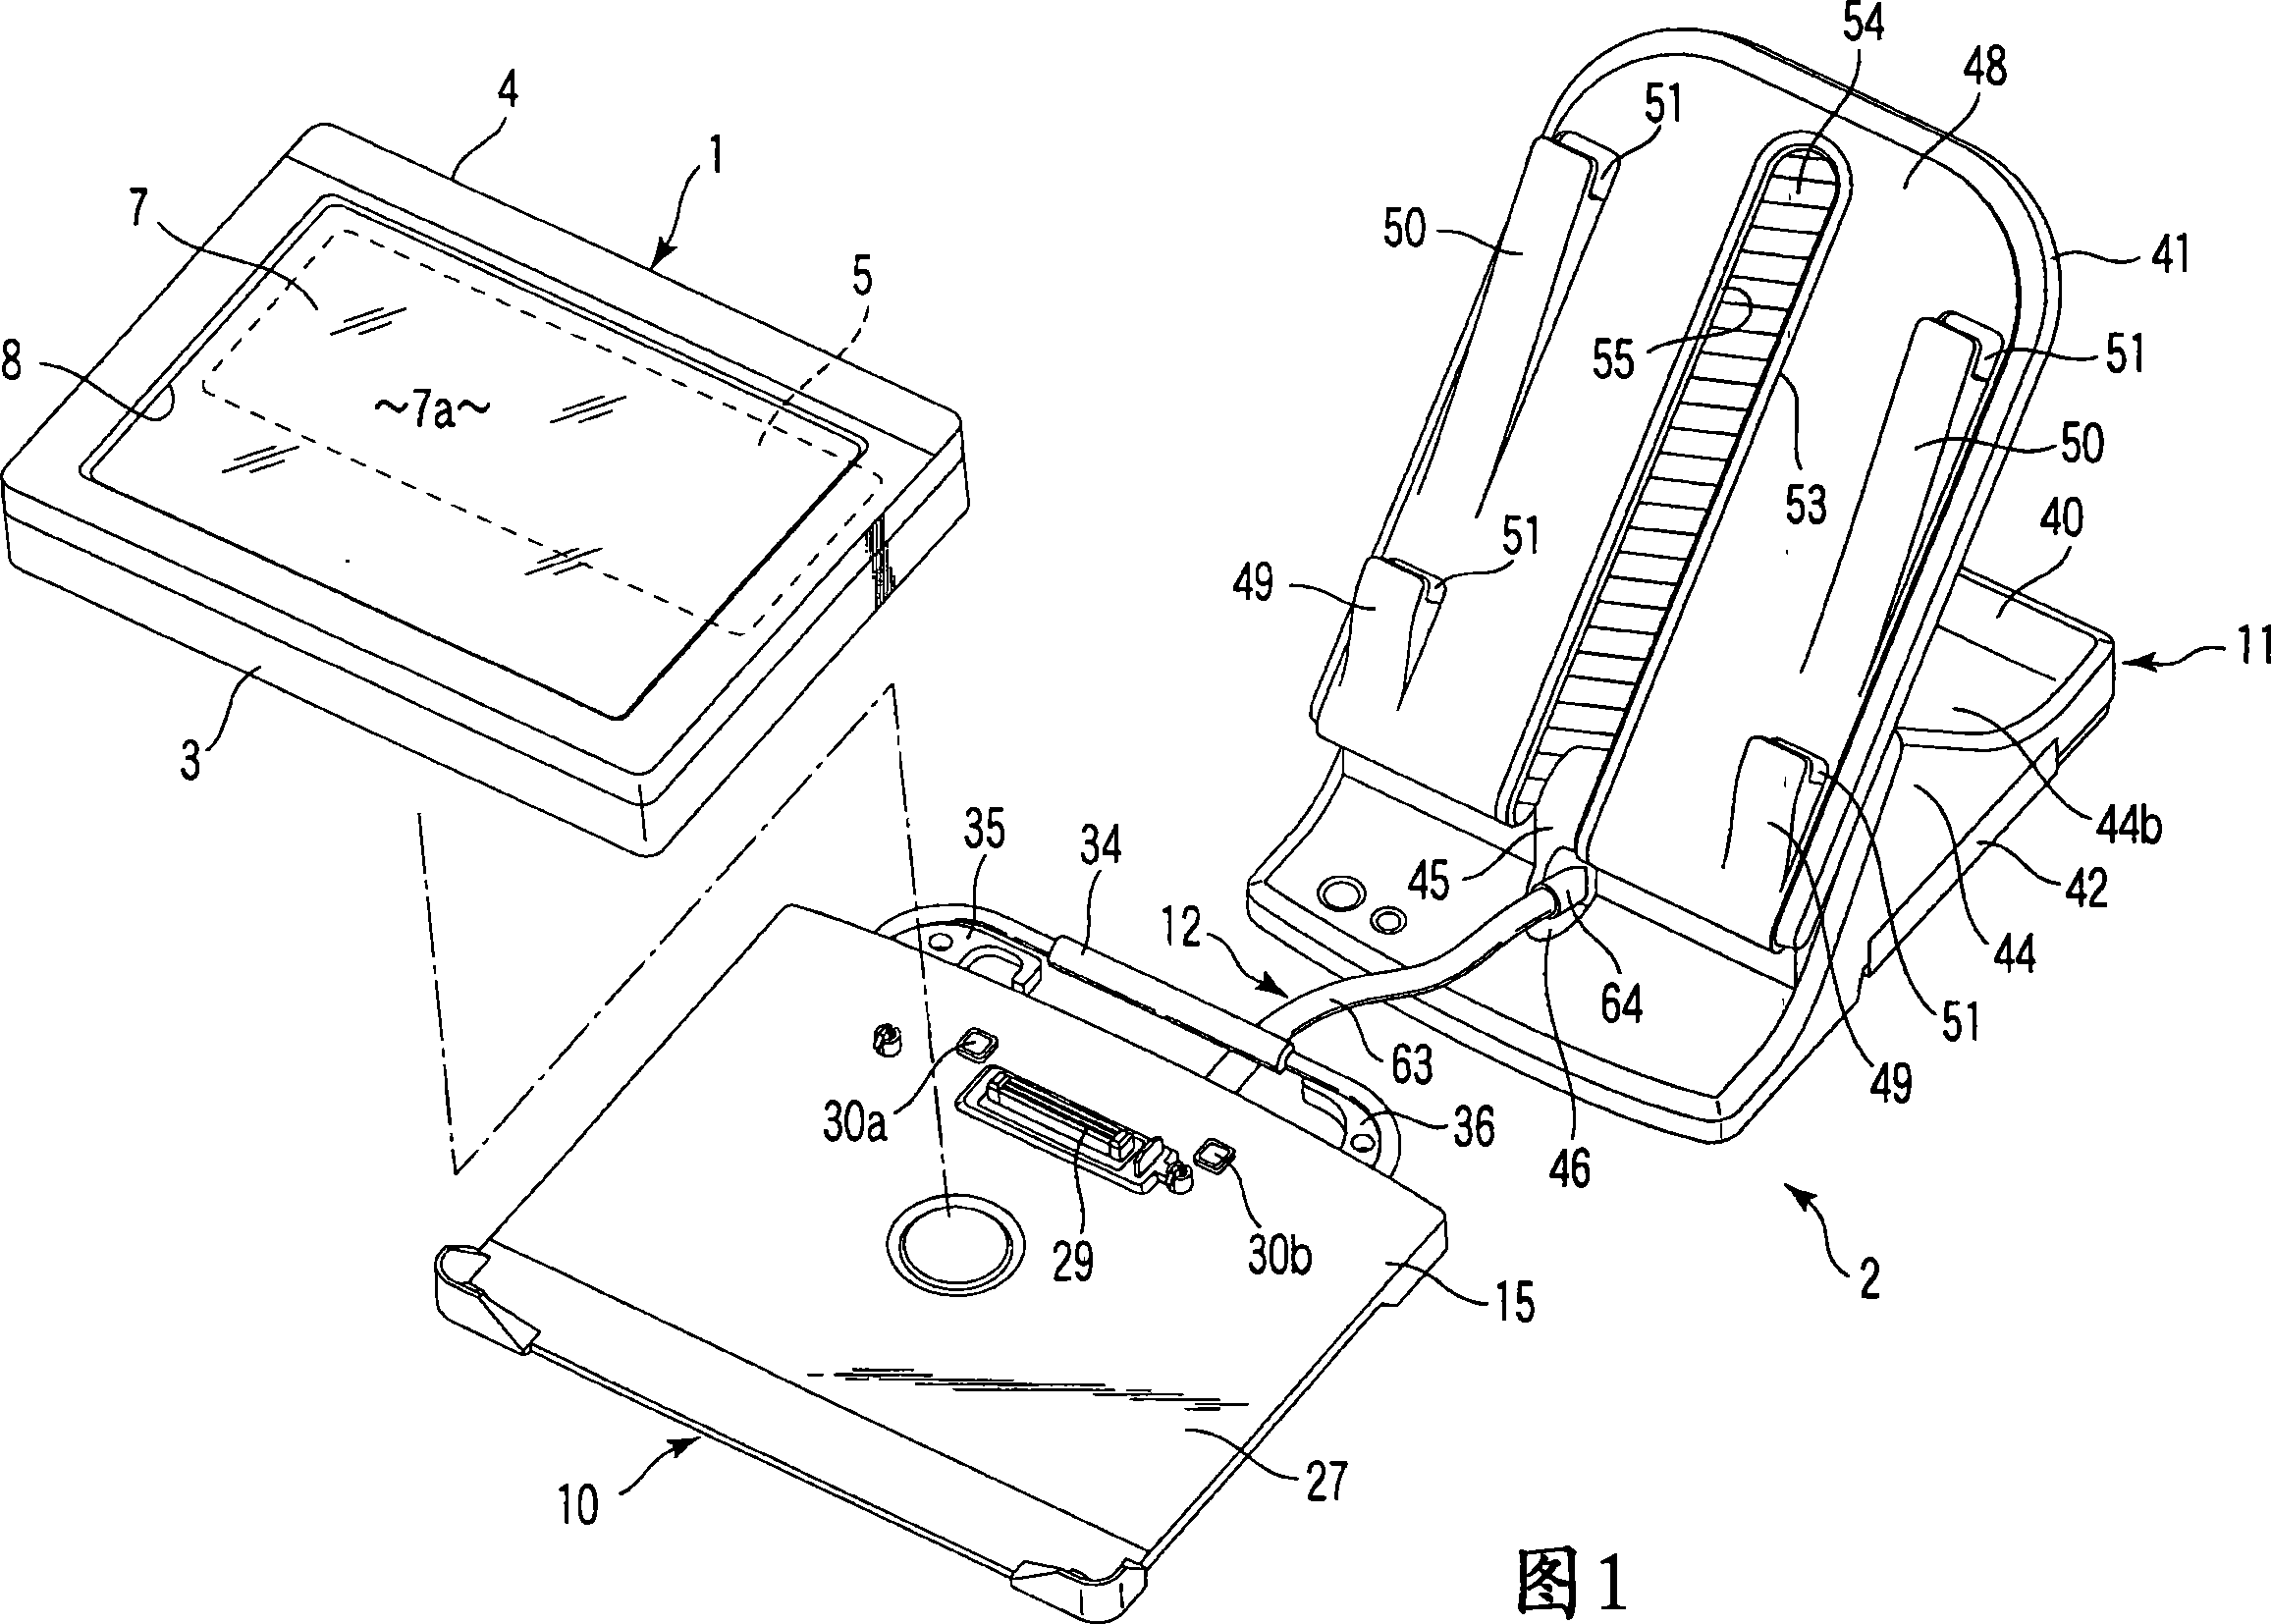 Supporting device having cable extending between two housings